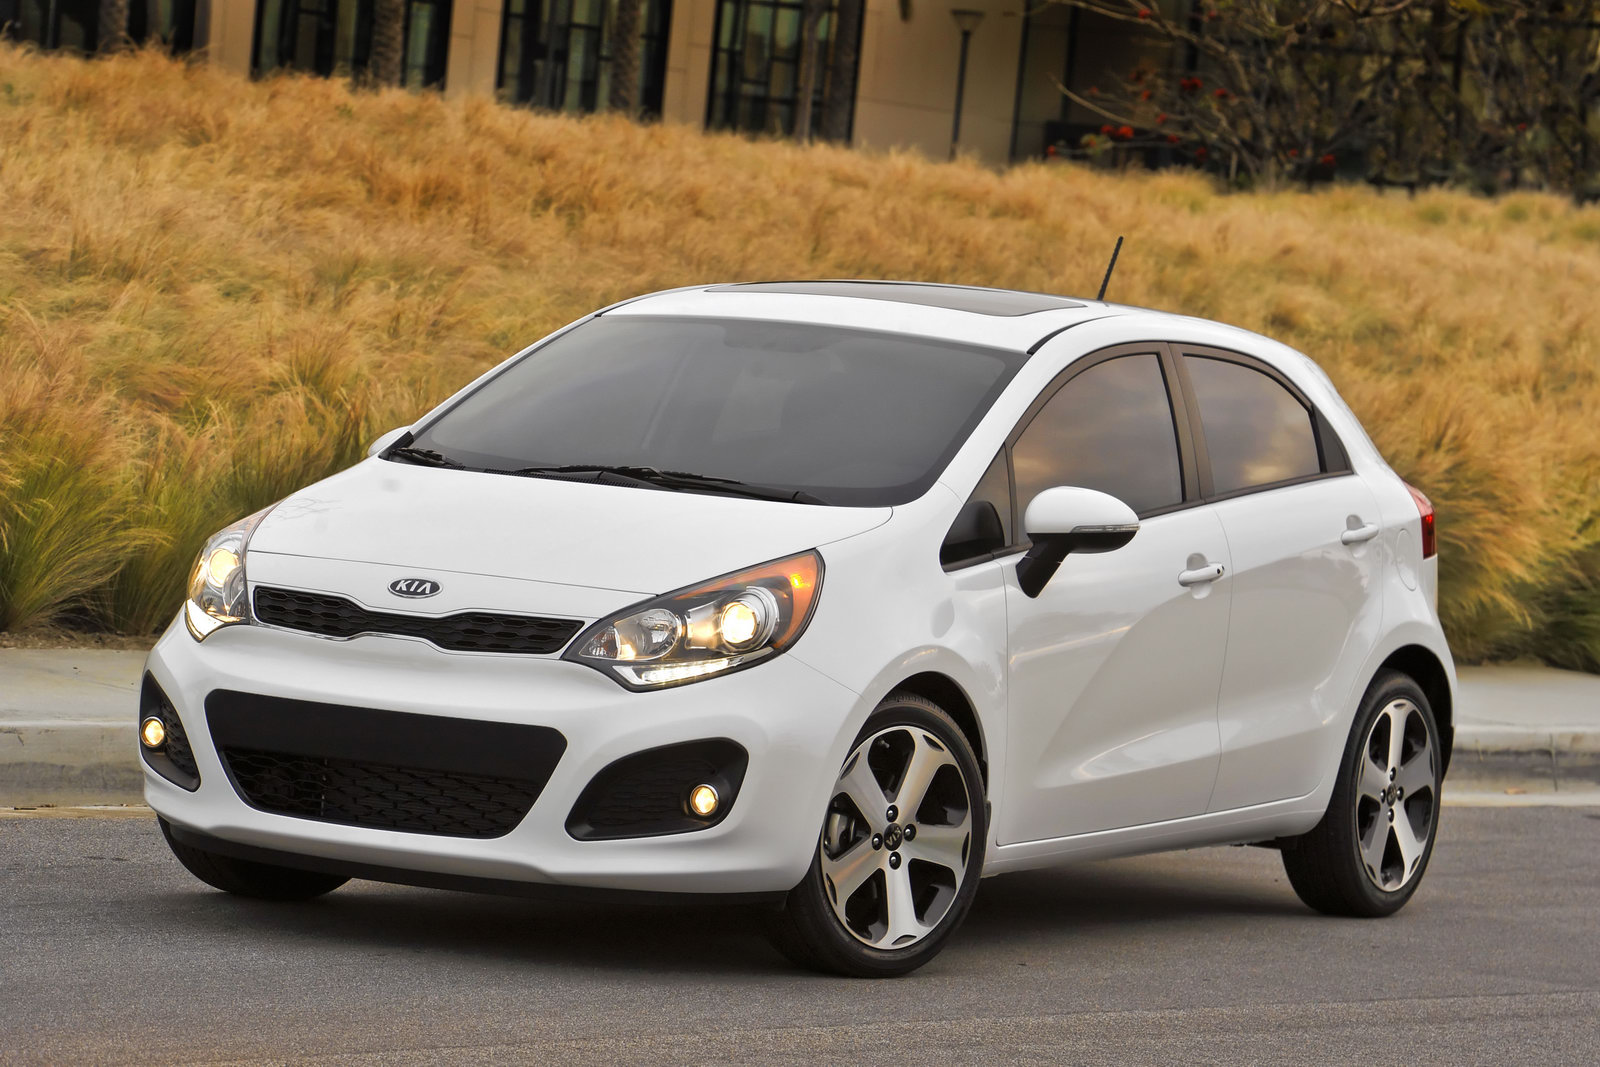 All-New 2012 Kia Rio 5-Door Hatch Priced from $14,350* in the U.S.